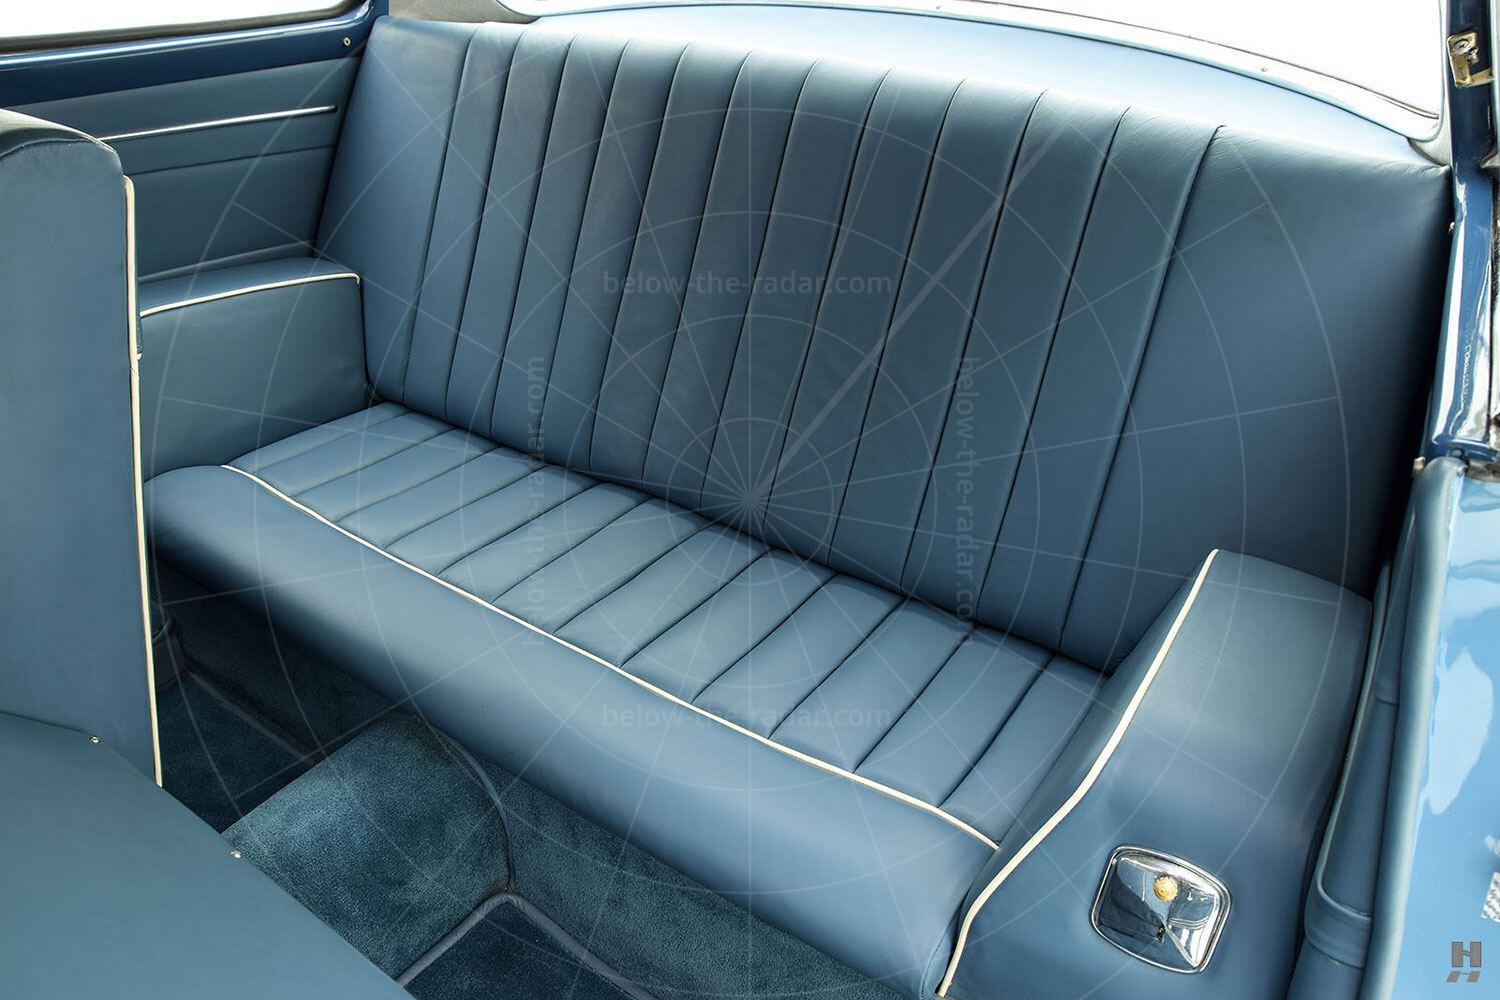 Chrysler Ghia special coupé rear seat Pic: Hyman Ltd | Chrysler Ghia special coupé rear seat